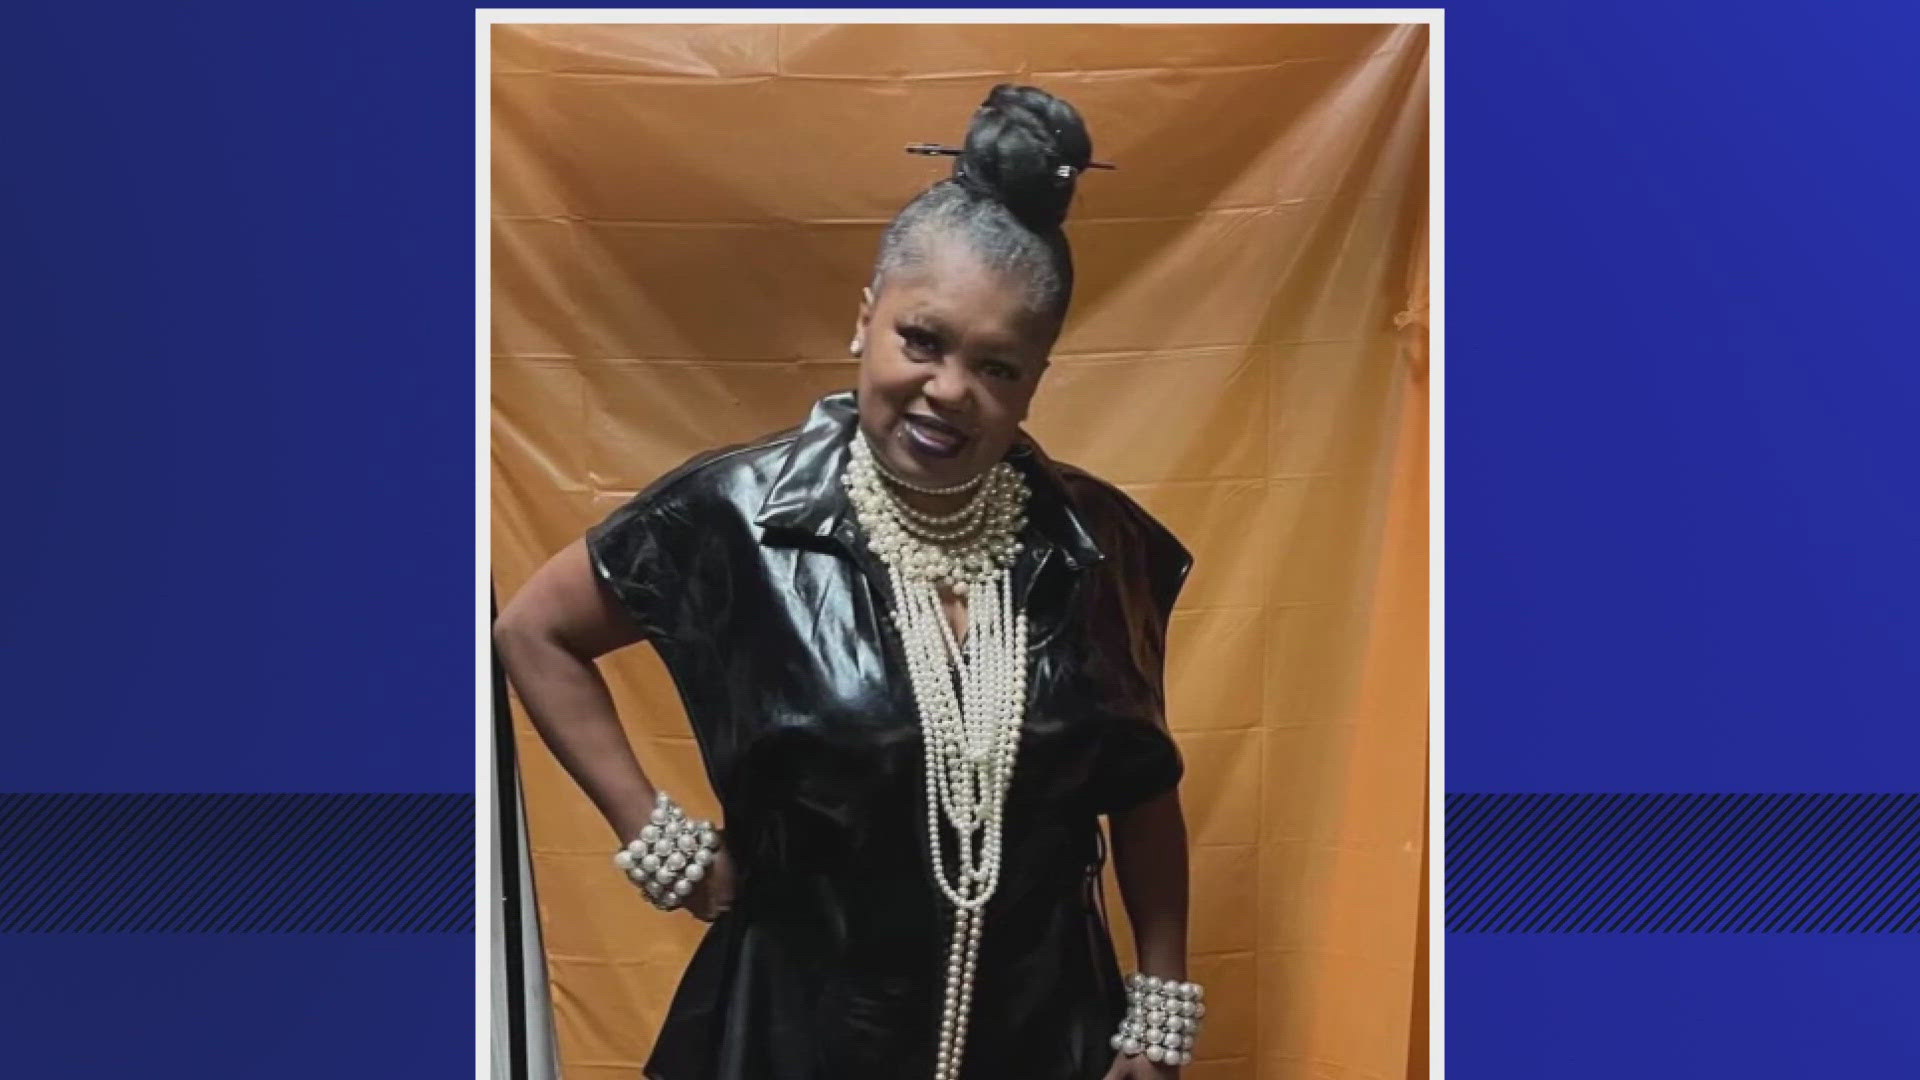 WFAA is learning new details about a woman who was found shot to death inside an apartment in Duncanville, Texas.